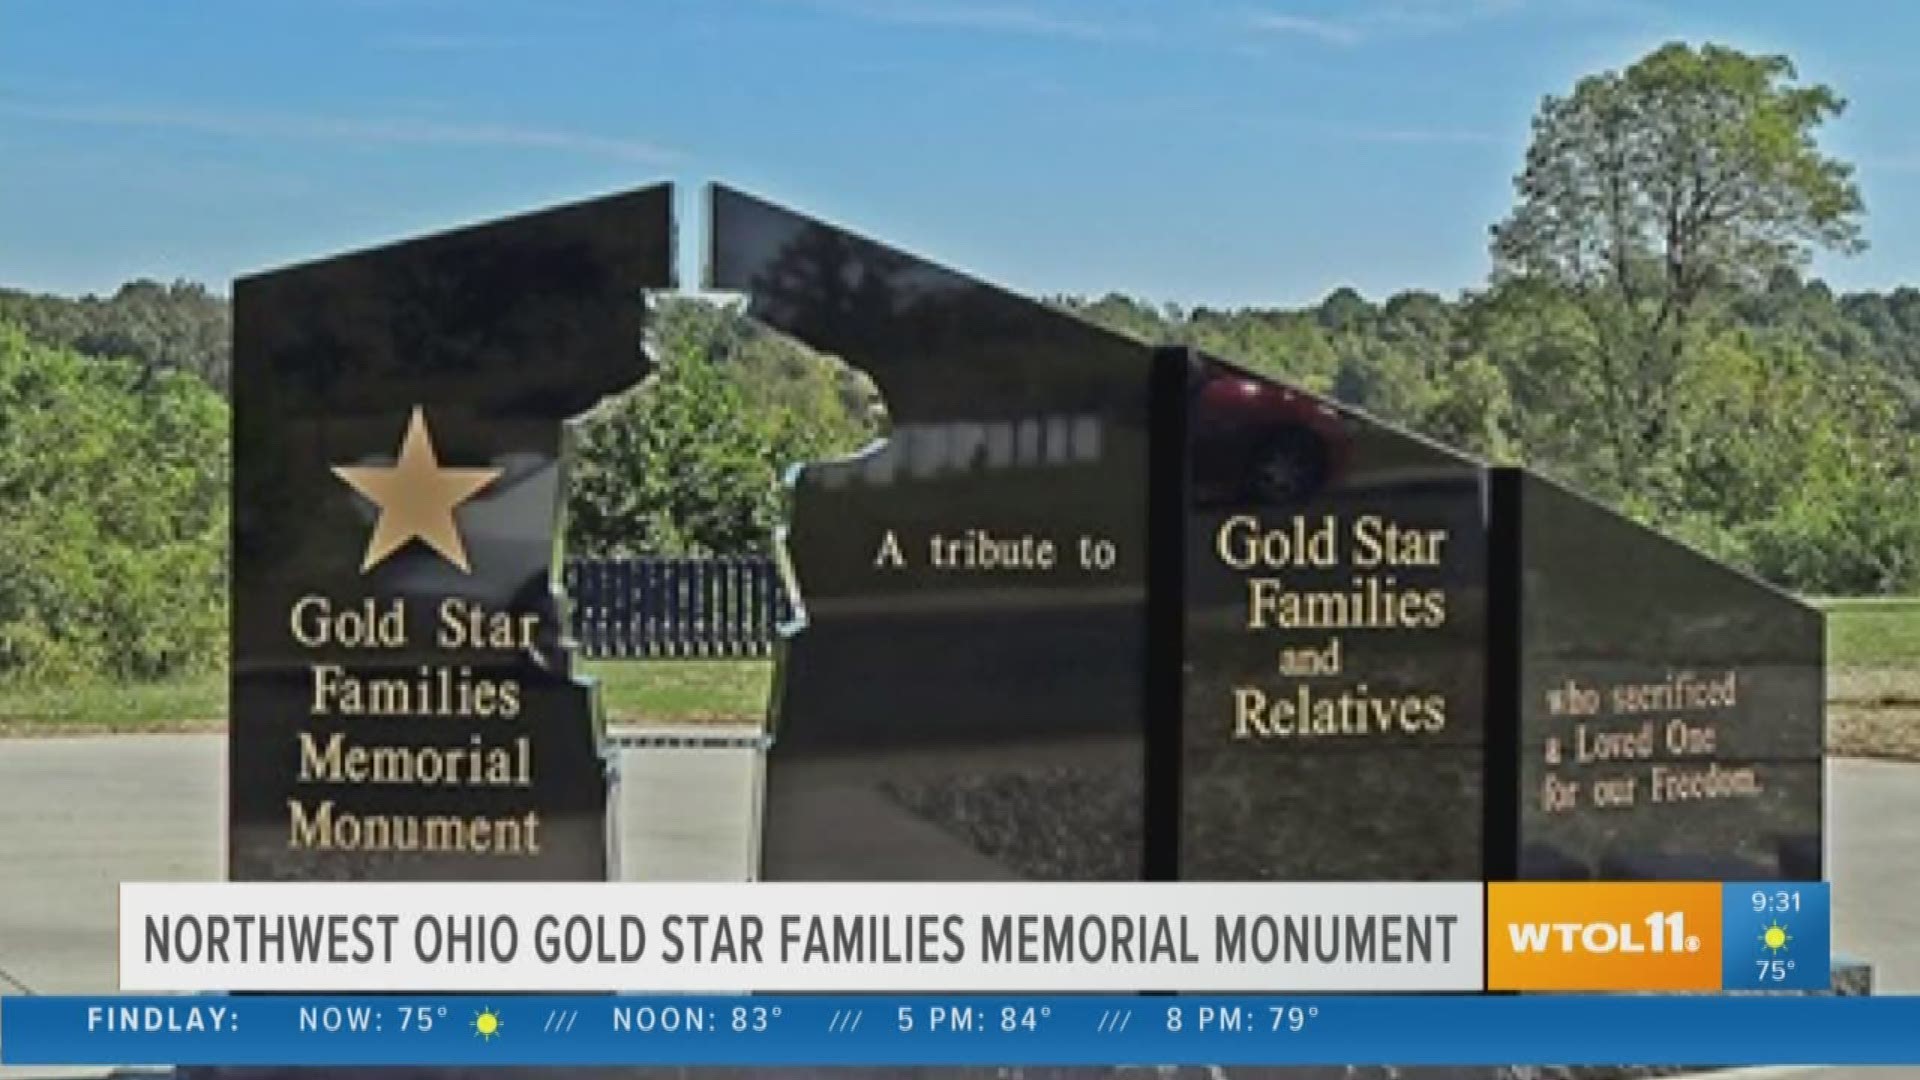 Remember the dedication of the northwest Ohio men and women who gave their life for our country with the Gold Star Families Memorial Monument.